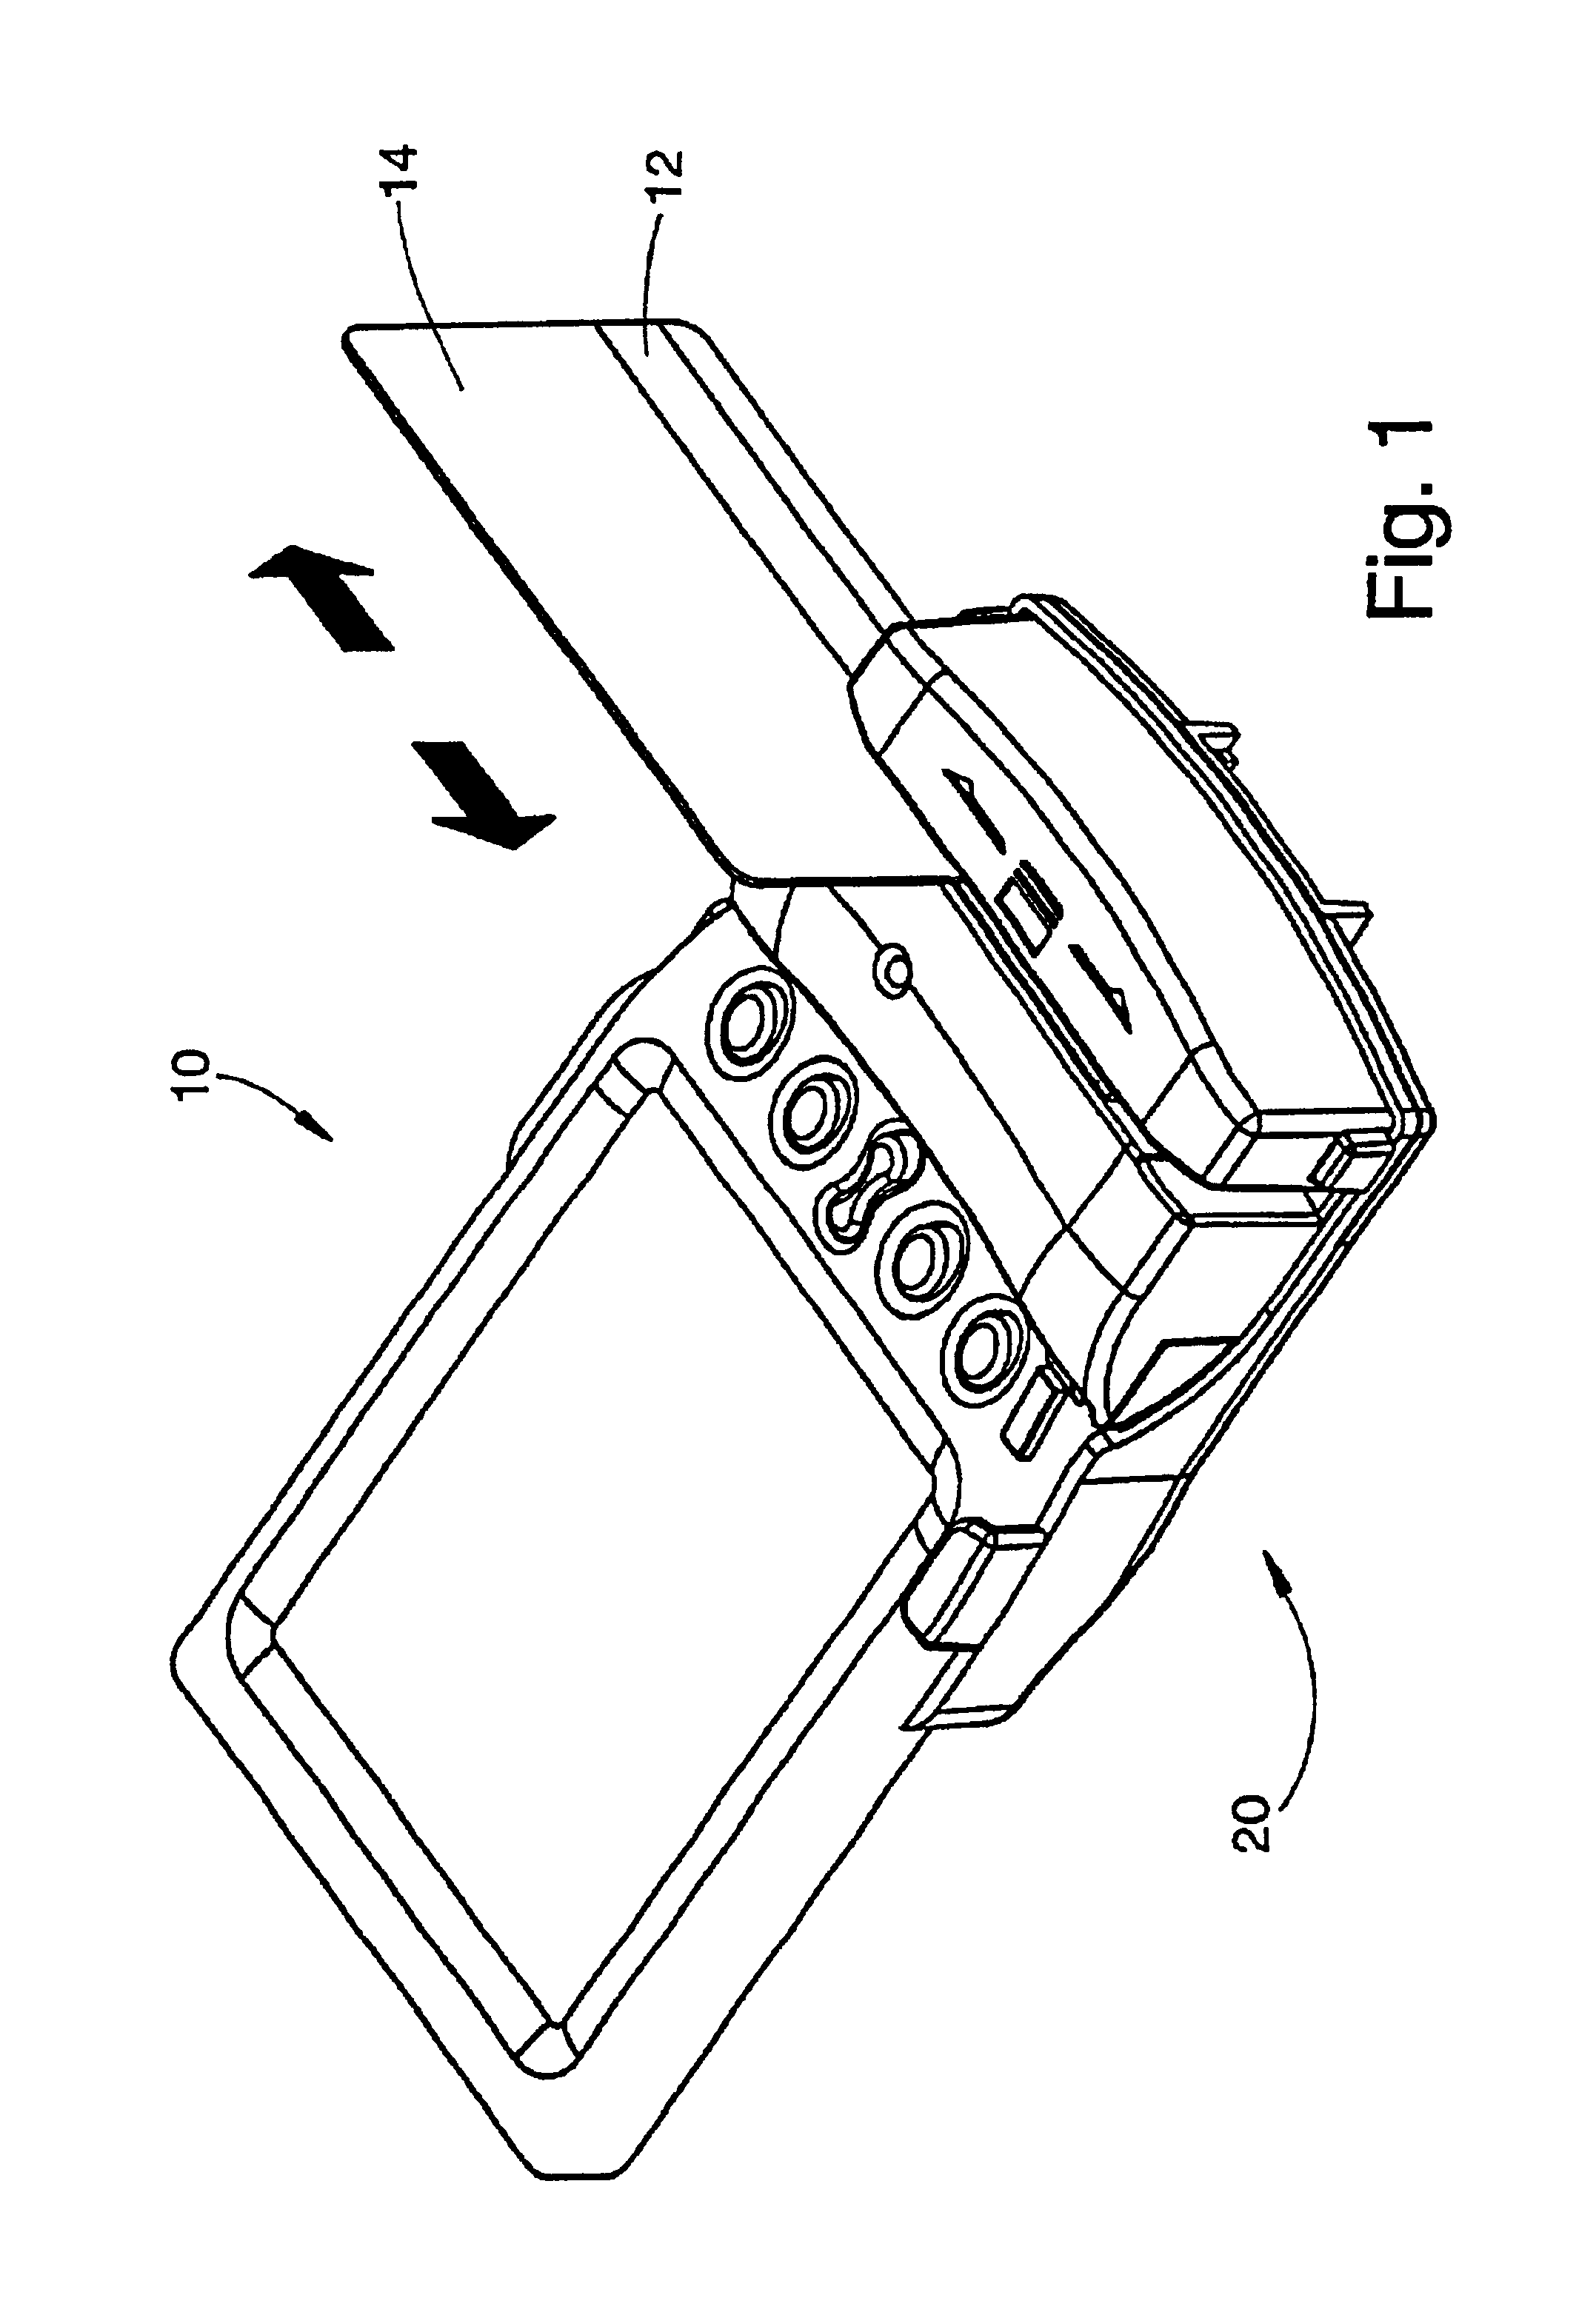 Magnetic strip reader with power management control for attachment to a PDA device